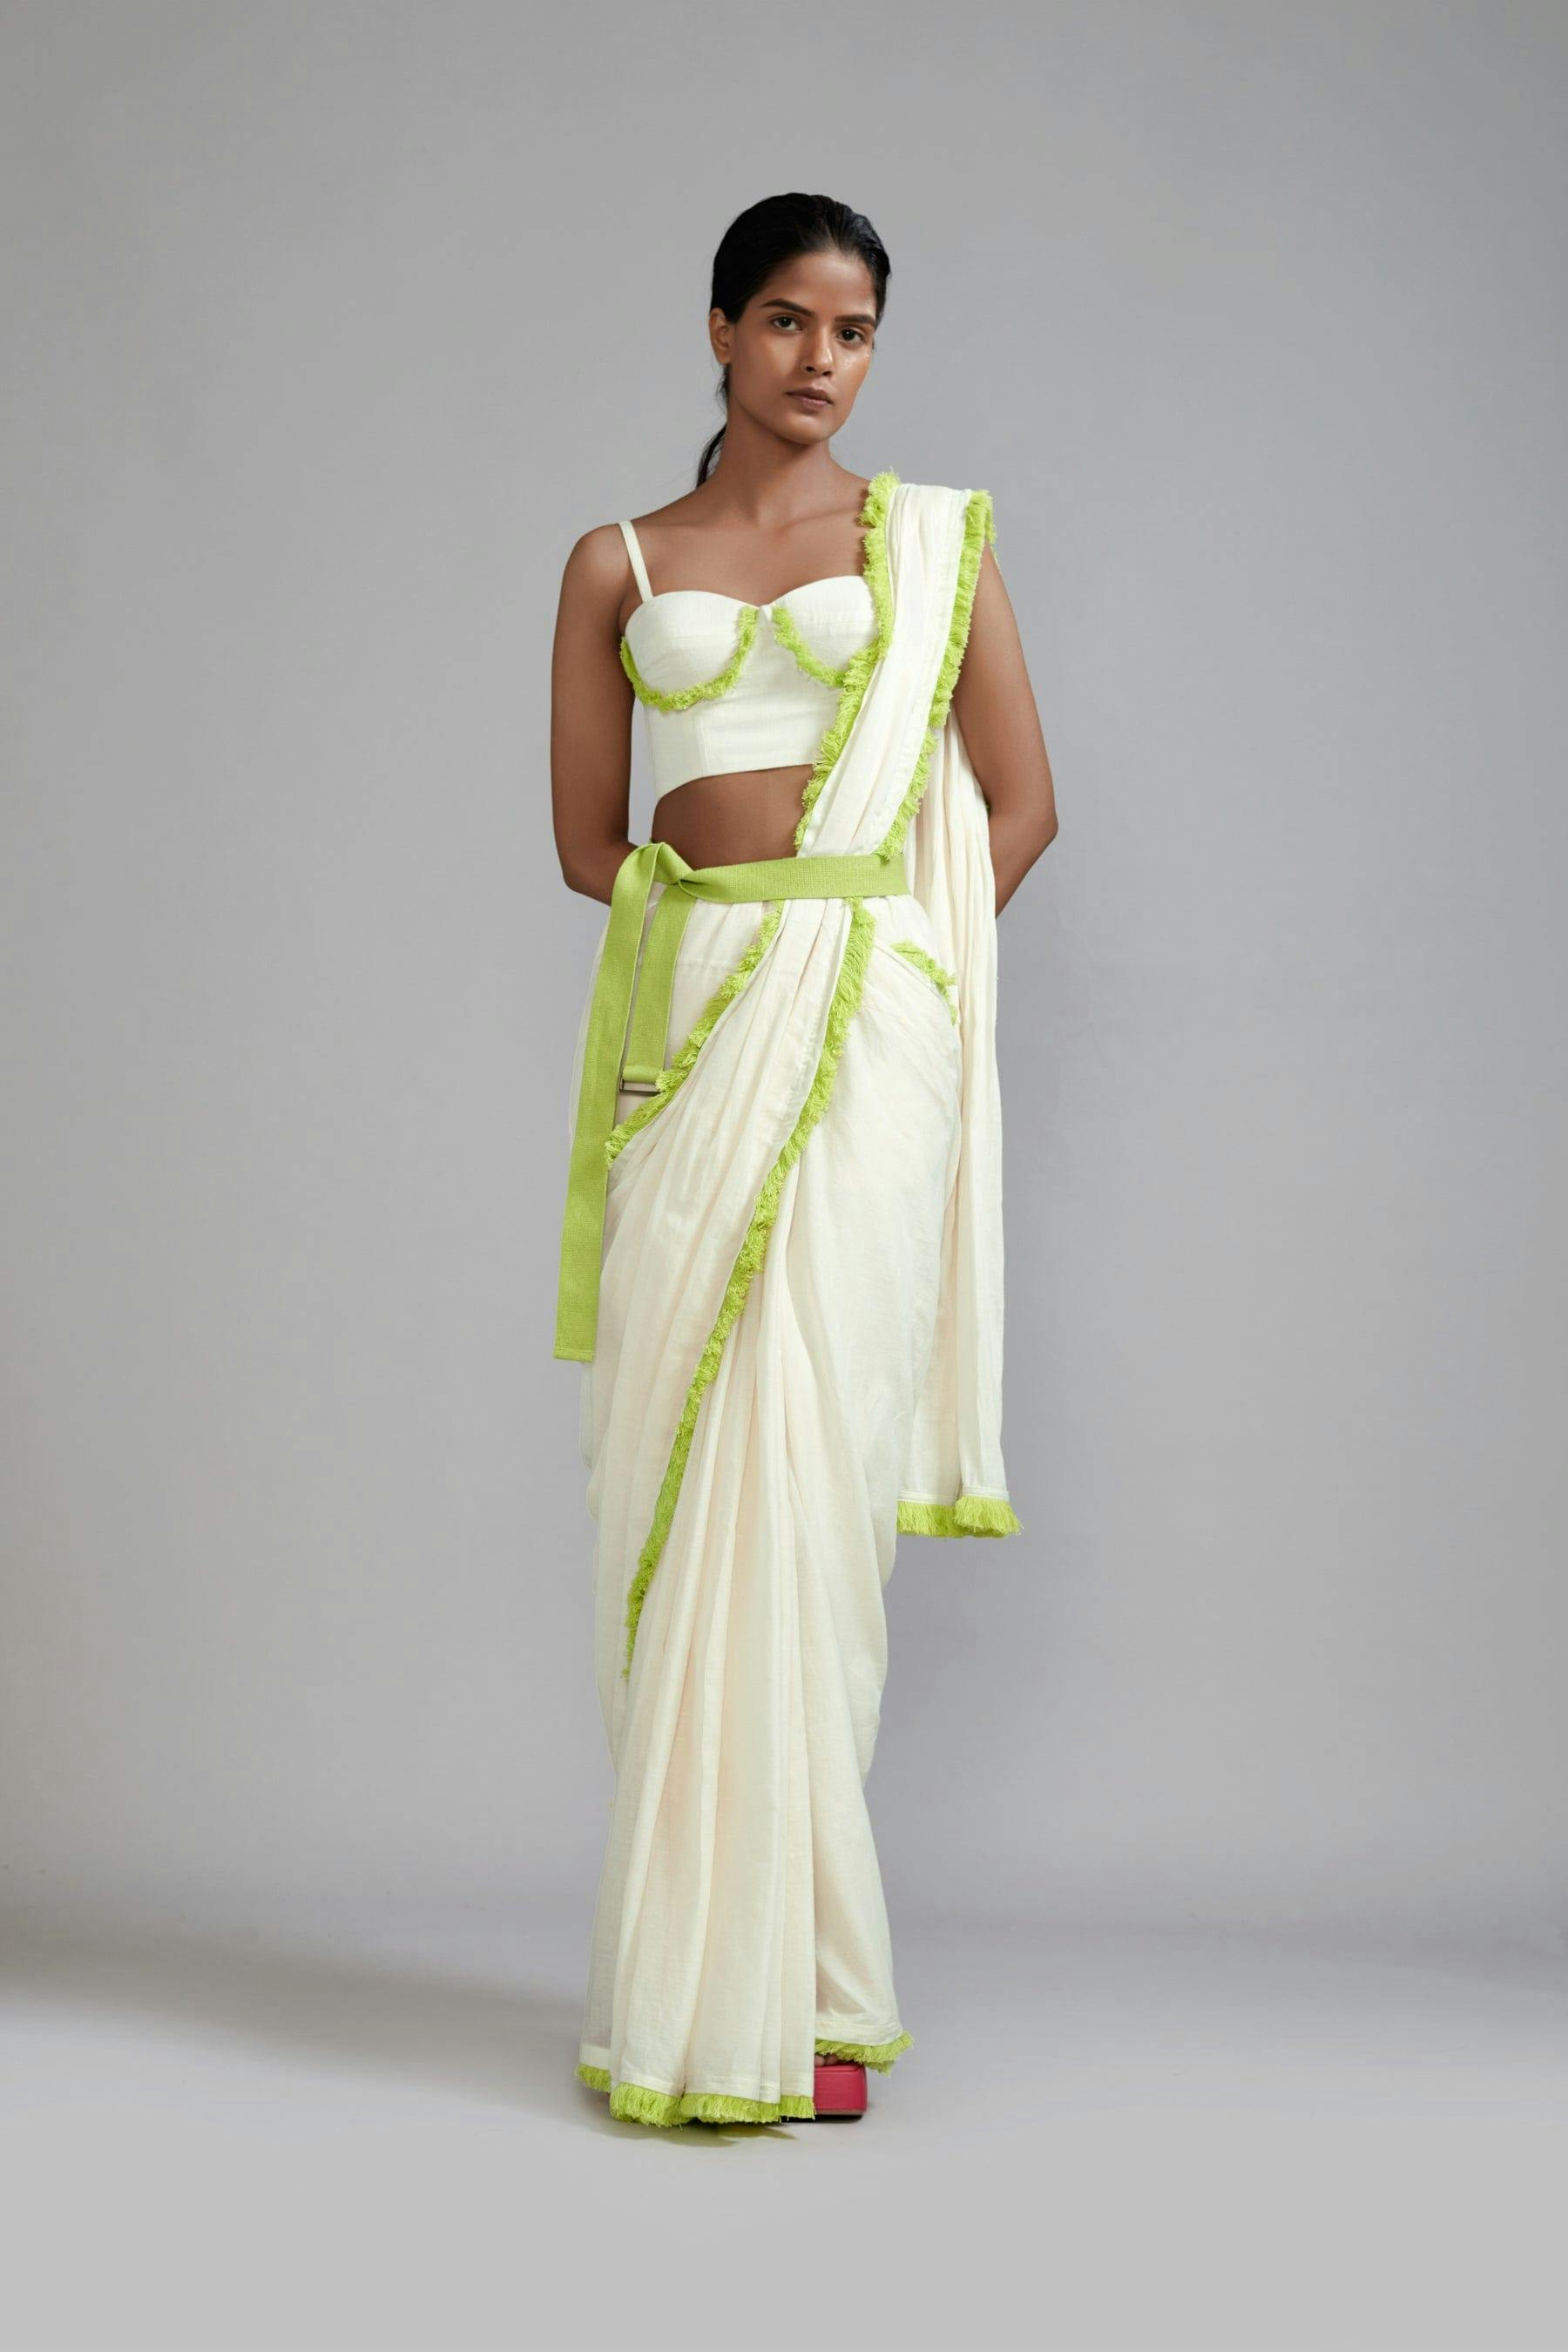 Thumbnail preview #0 for Off-White with Neon Green Saree & Fringed Corset Set (2 PCS)